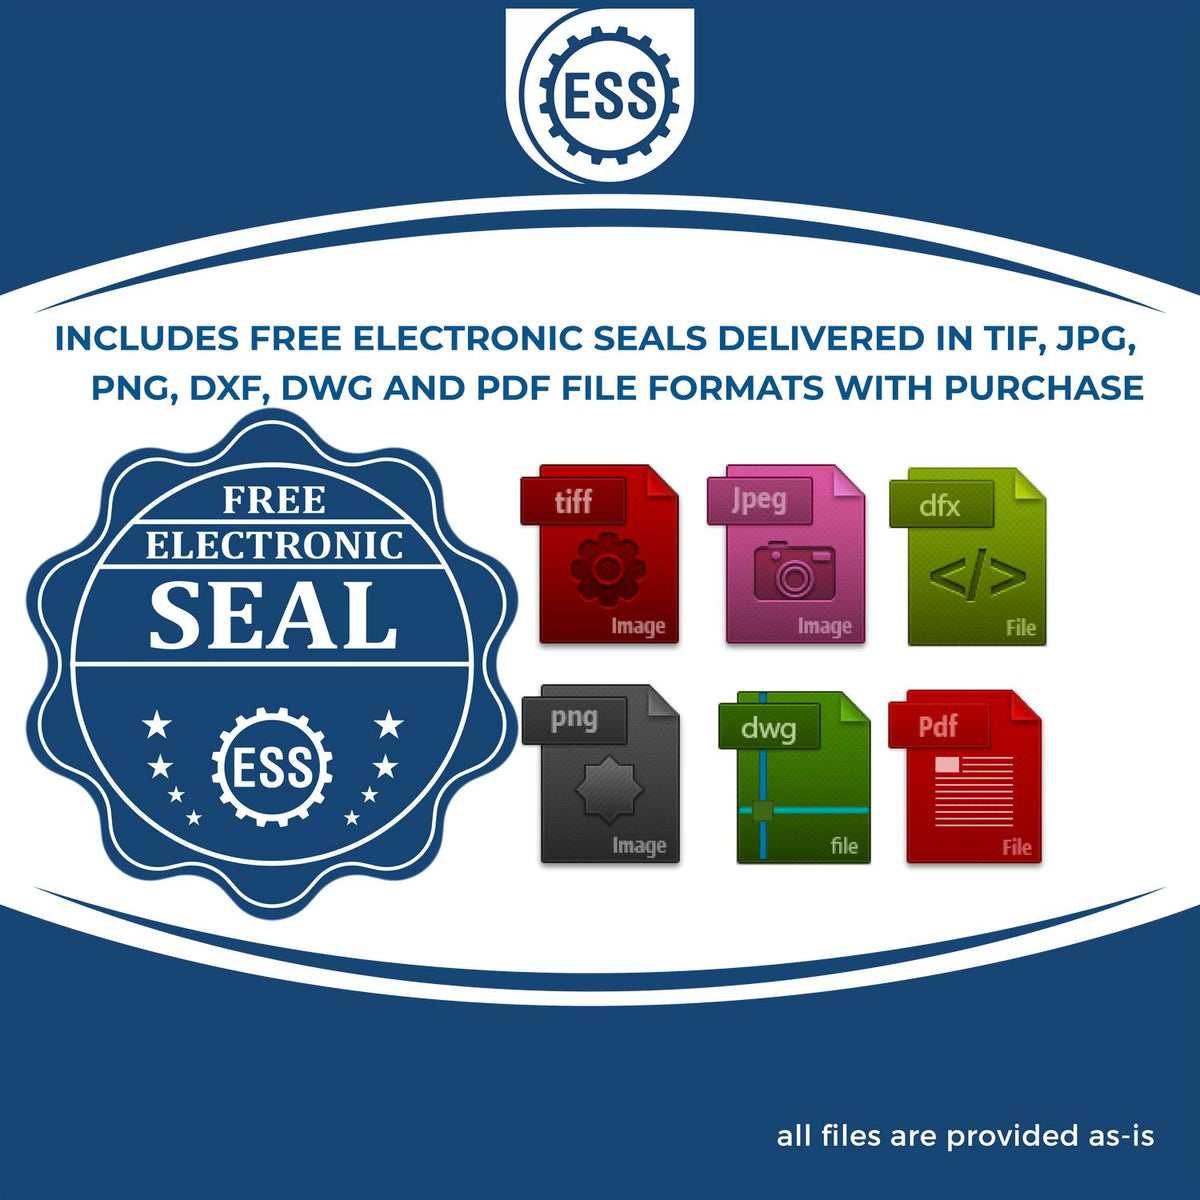 An infographic for the free electronic seal for the Self-Inking State Seal Texas Notary Stamp illustrating the different file type icons such as DXF, DWG, TIF, JPG and PNG.